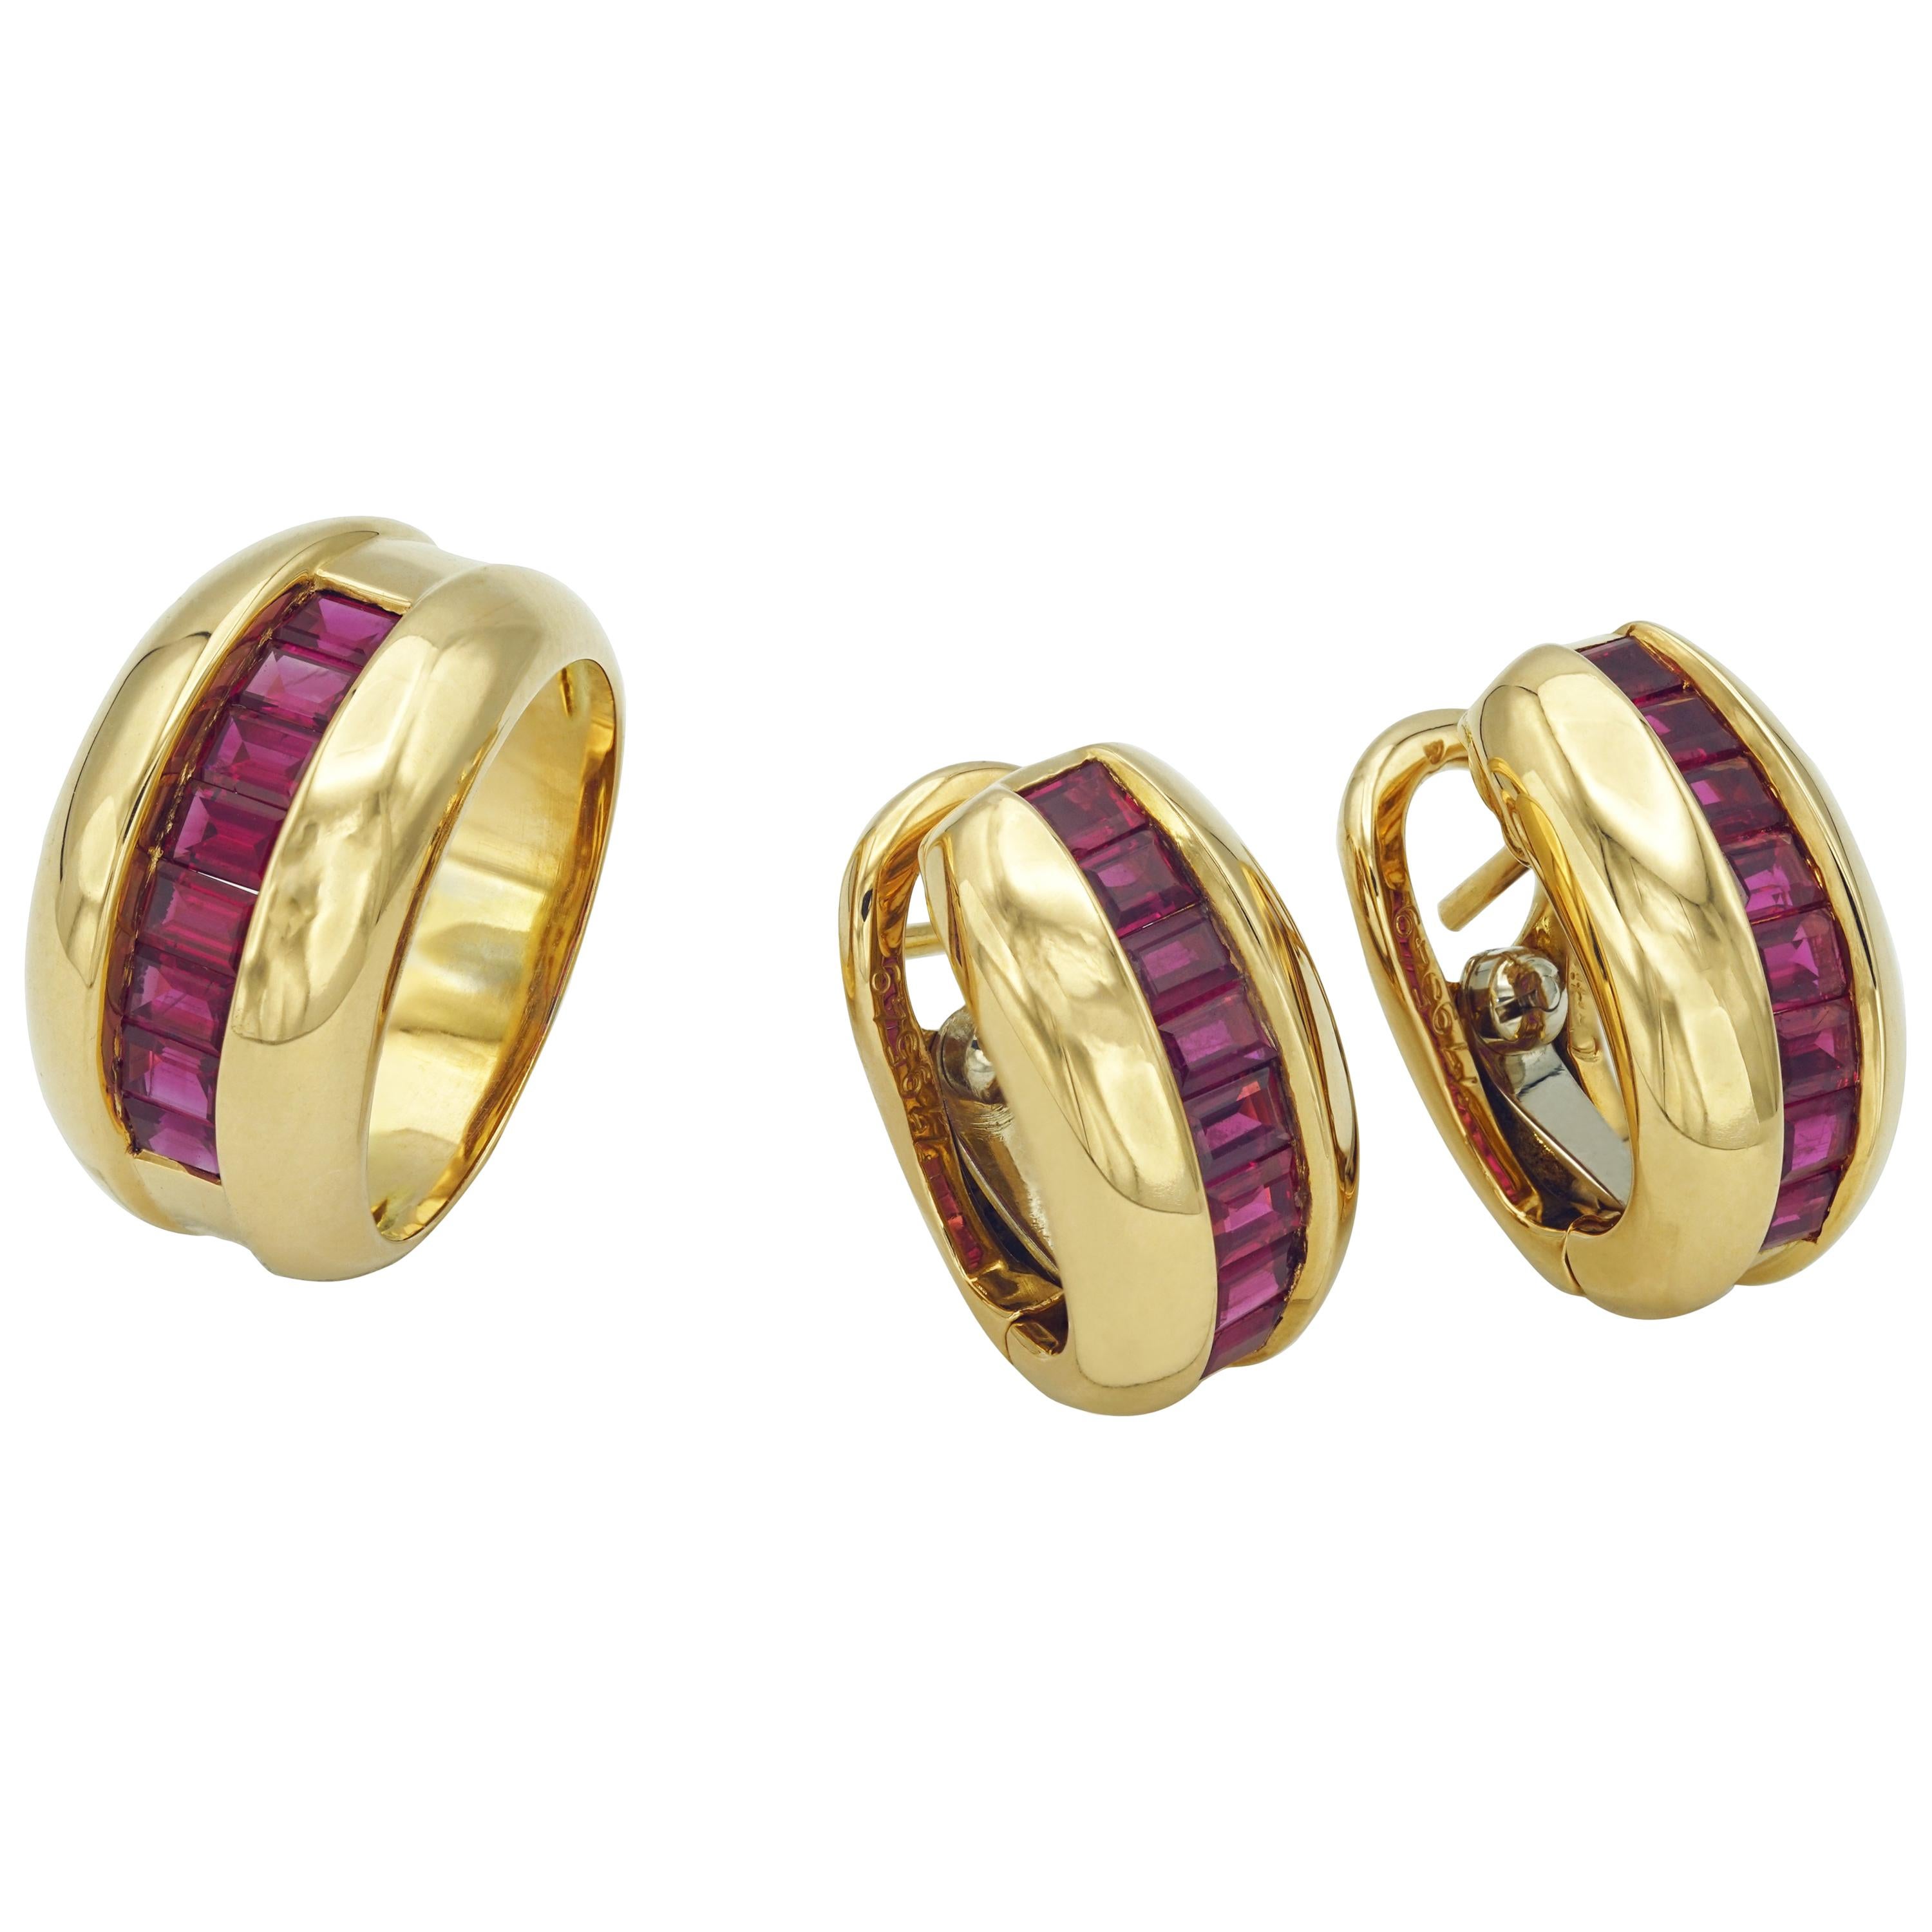 Cartier Ruby Gold Ring And Earrings